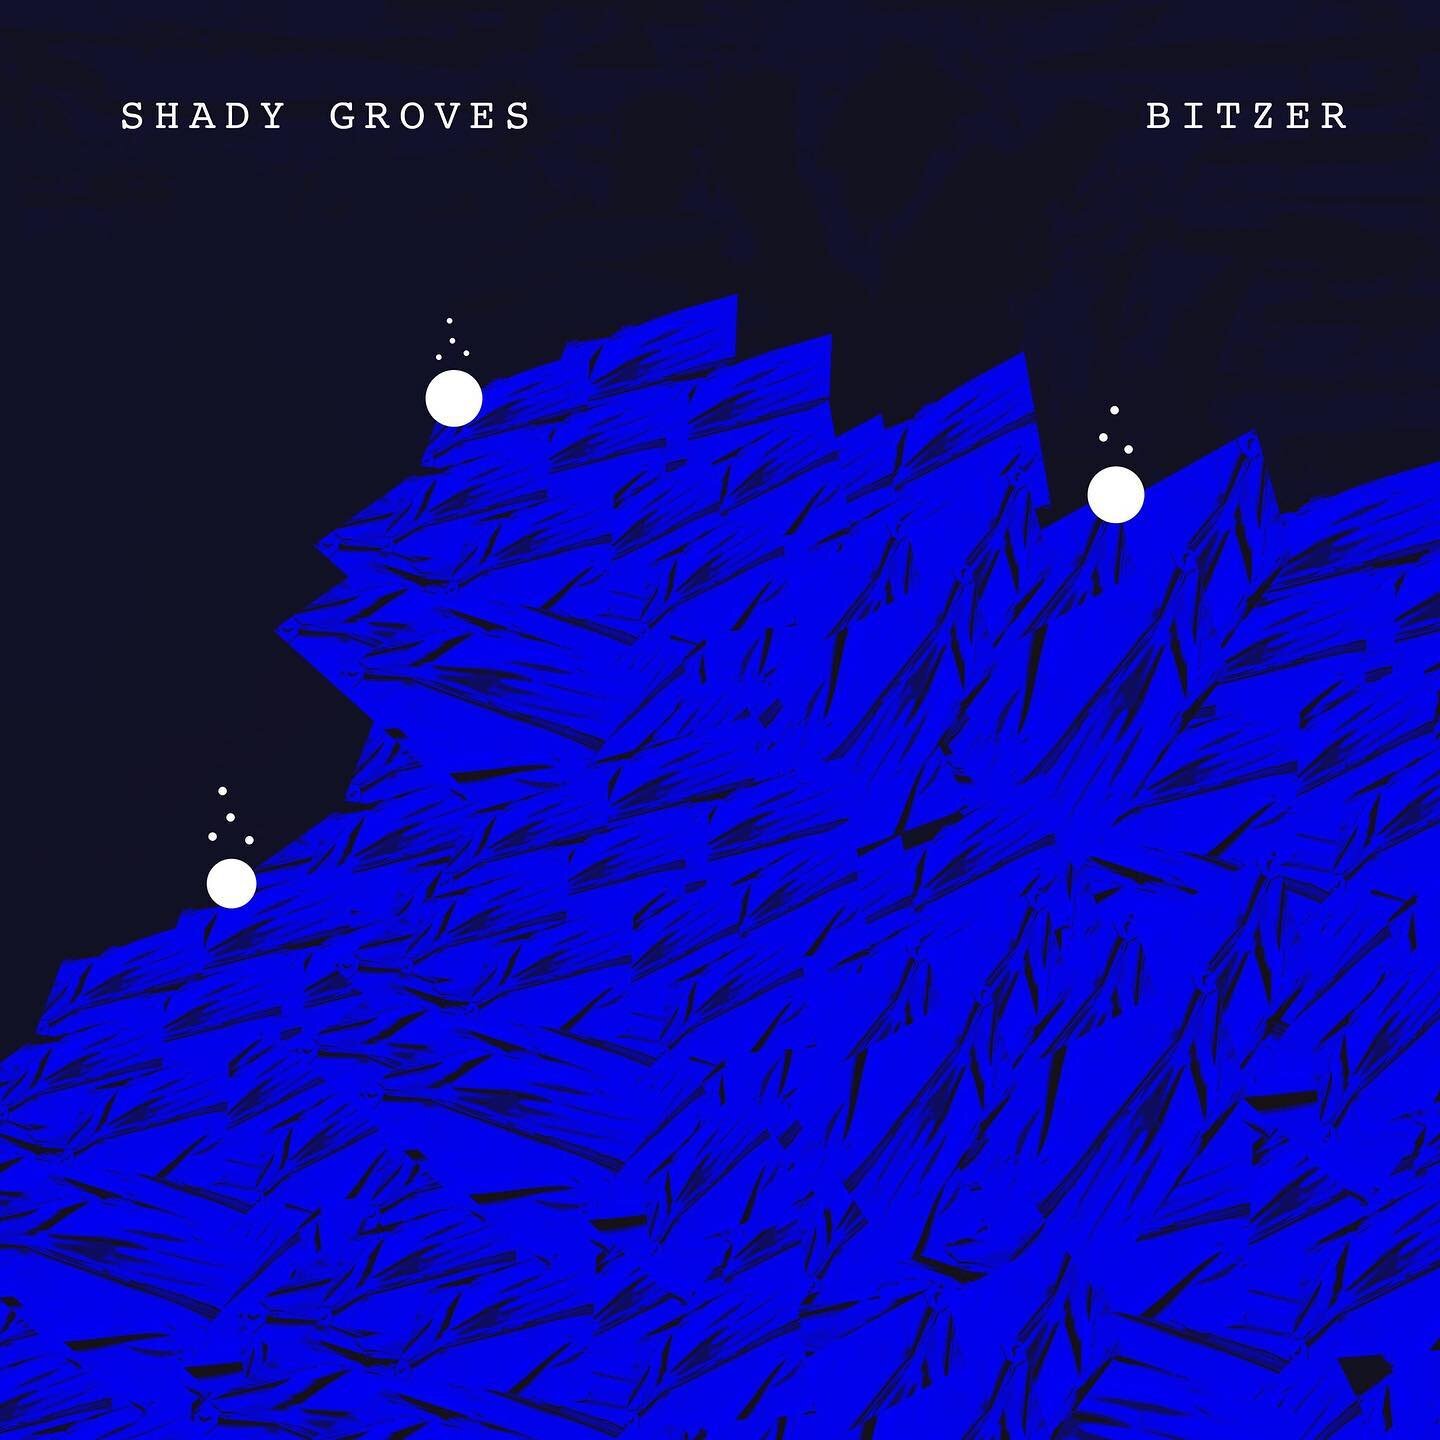 Cinco de Mayo yesterday marked the 5 year anniversary of our 1st @shadygrovesband LP &ldquo;Bitzer&rdquo; 💿
Somehow it&rsquo;s already been half a decade since I started this &ldquo;band&rdquo; with my two best friends Dylan Caron @quietwolfband &am